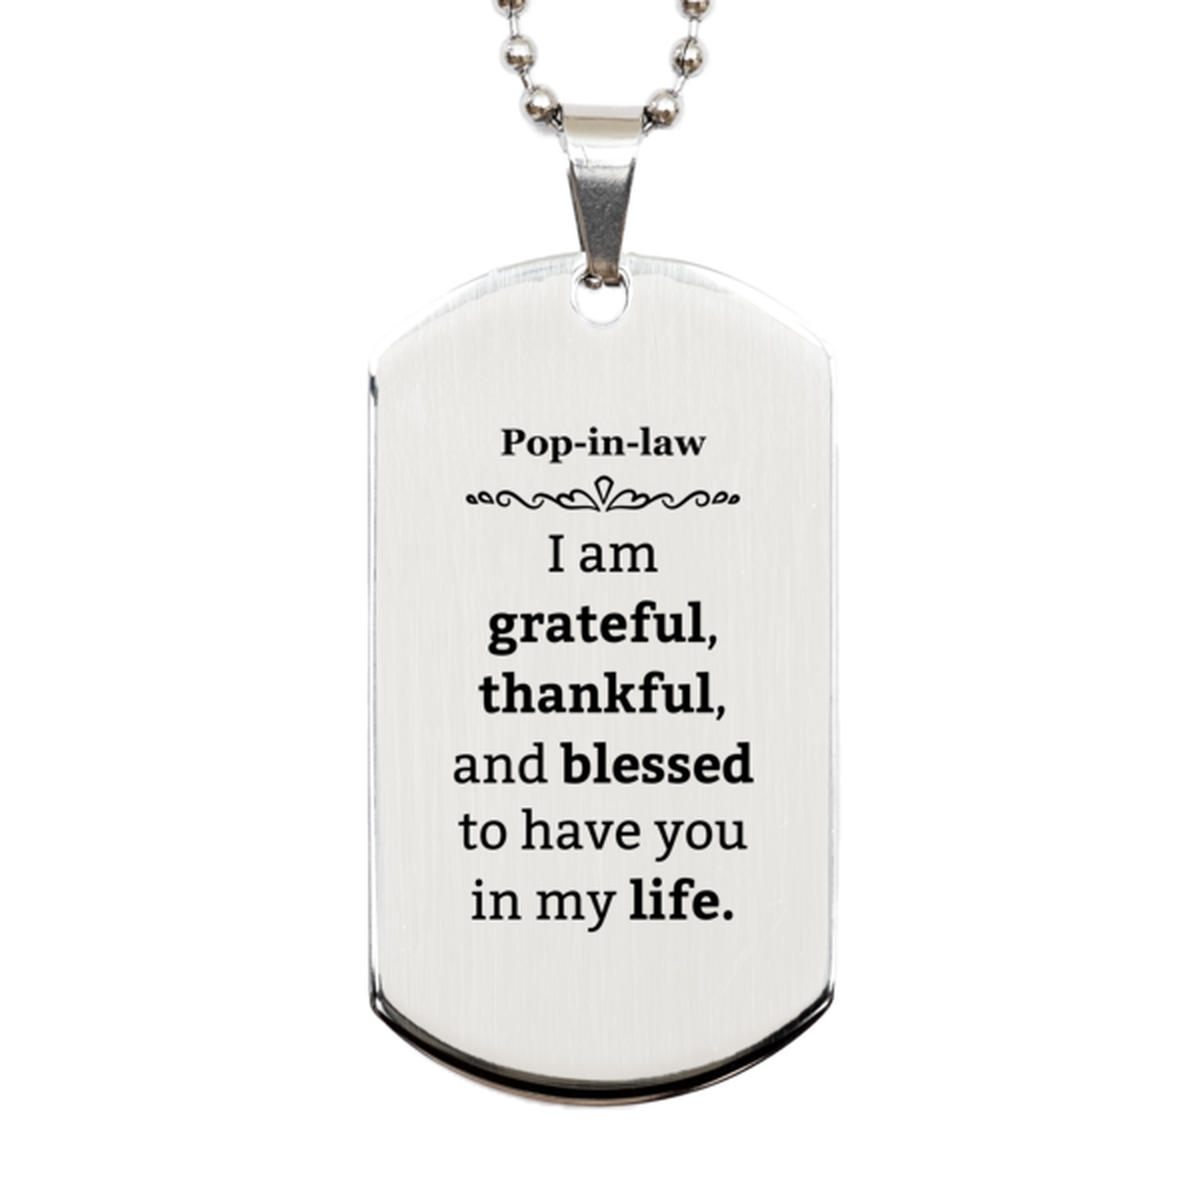 Pop-in-law Appreciation Gifts, I am grateful, thankful, and blessed, Thank You Silver Dog Tag for Pop-in-law, Birthday Inspiration Gifts for Pop-in-law